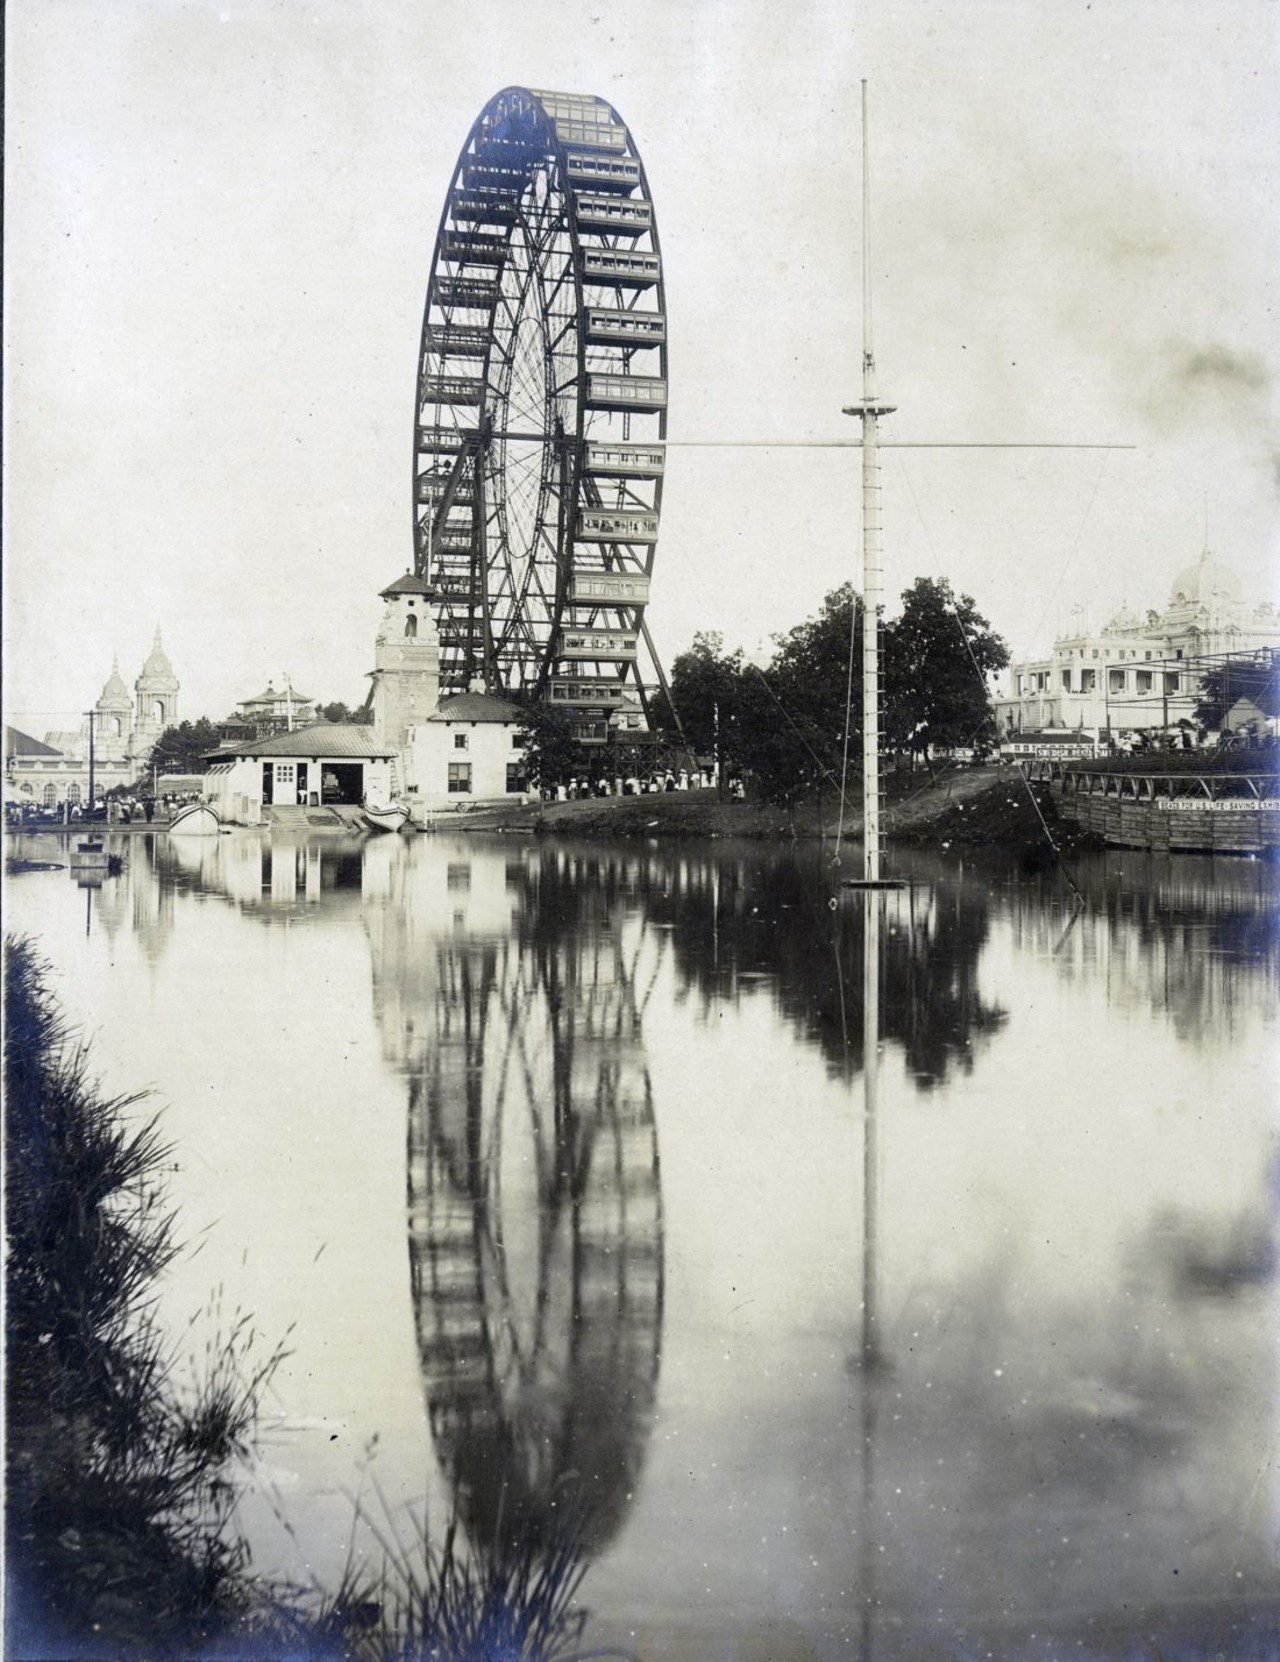 OBSERVATION WHEEL AND THE U.S.A. LIFE SAVING STATION AT THE 1904 WORLD'S FAIR. (FERRIS WHEEL).
Find out more about this photo at MoHistory.org.